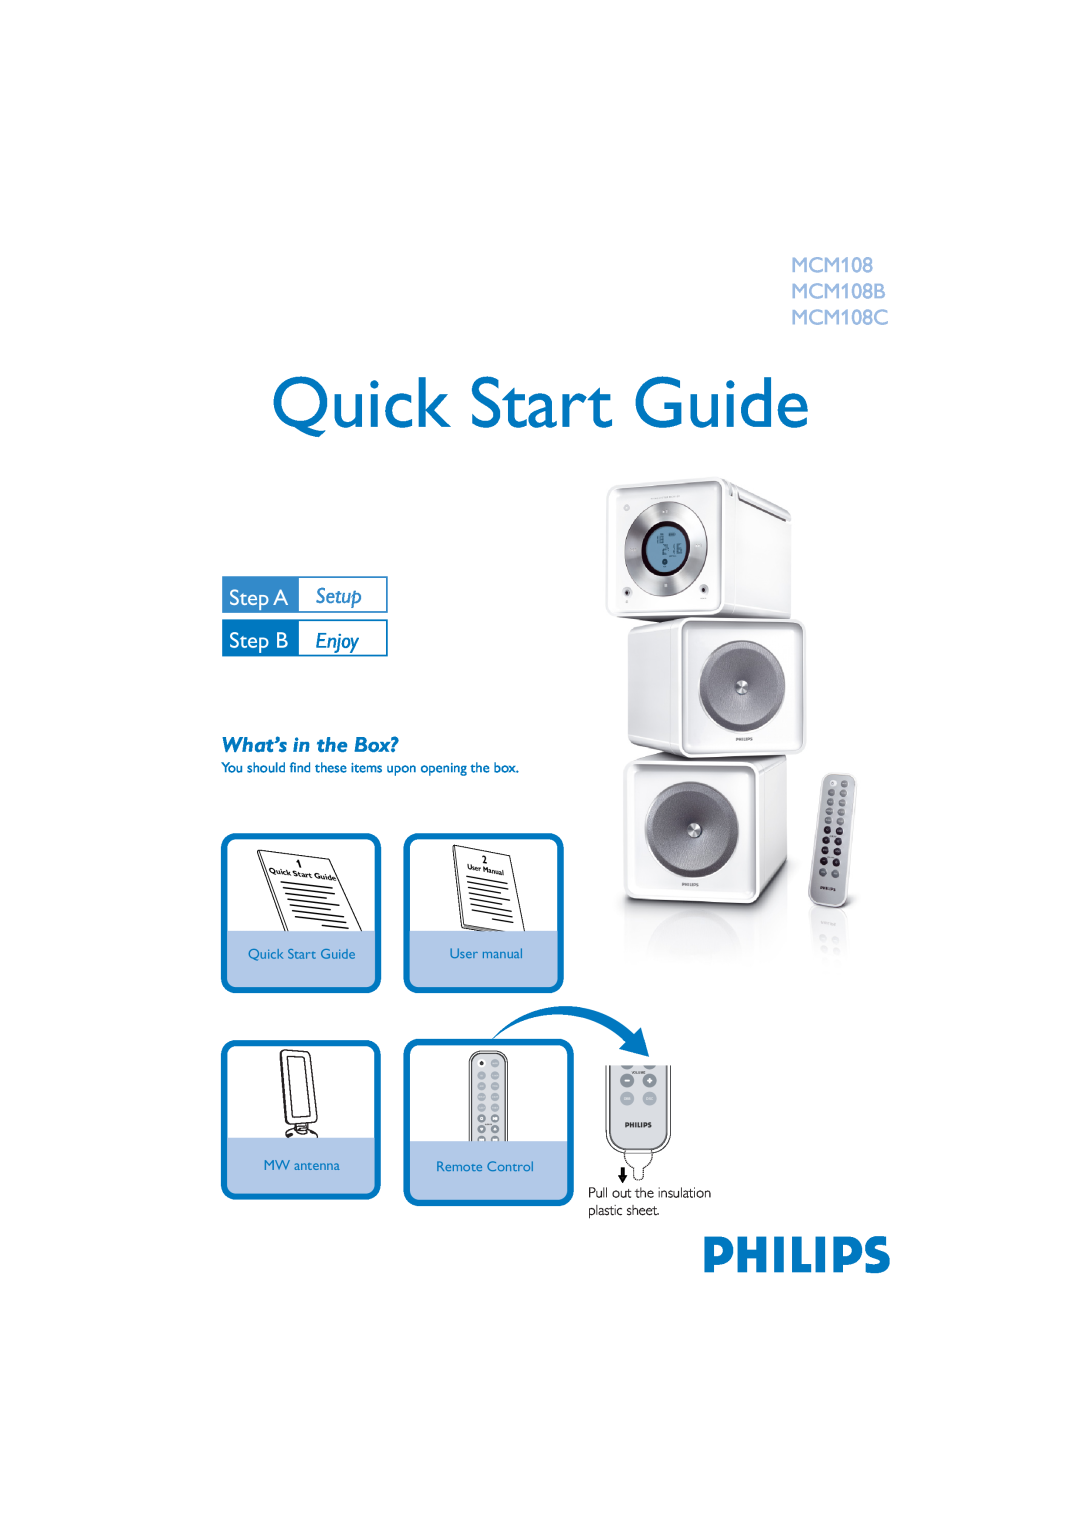 Philips quick start Quick Start Guide, Step A, Step B, MCM108 MCM108B MCM108C, Setup, Enjoy, What’s in the Box?, Volume 